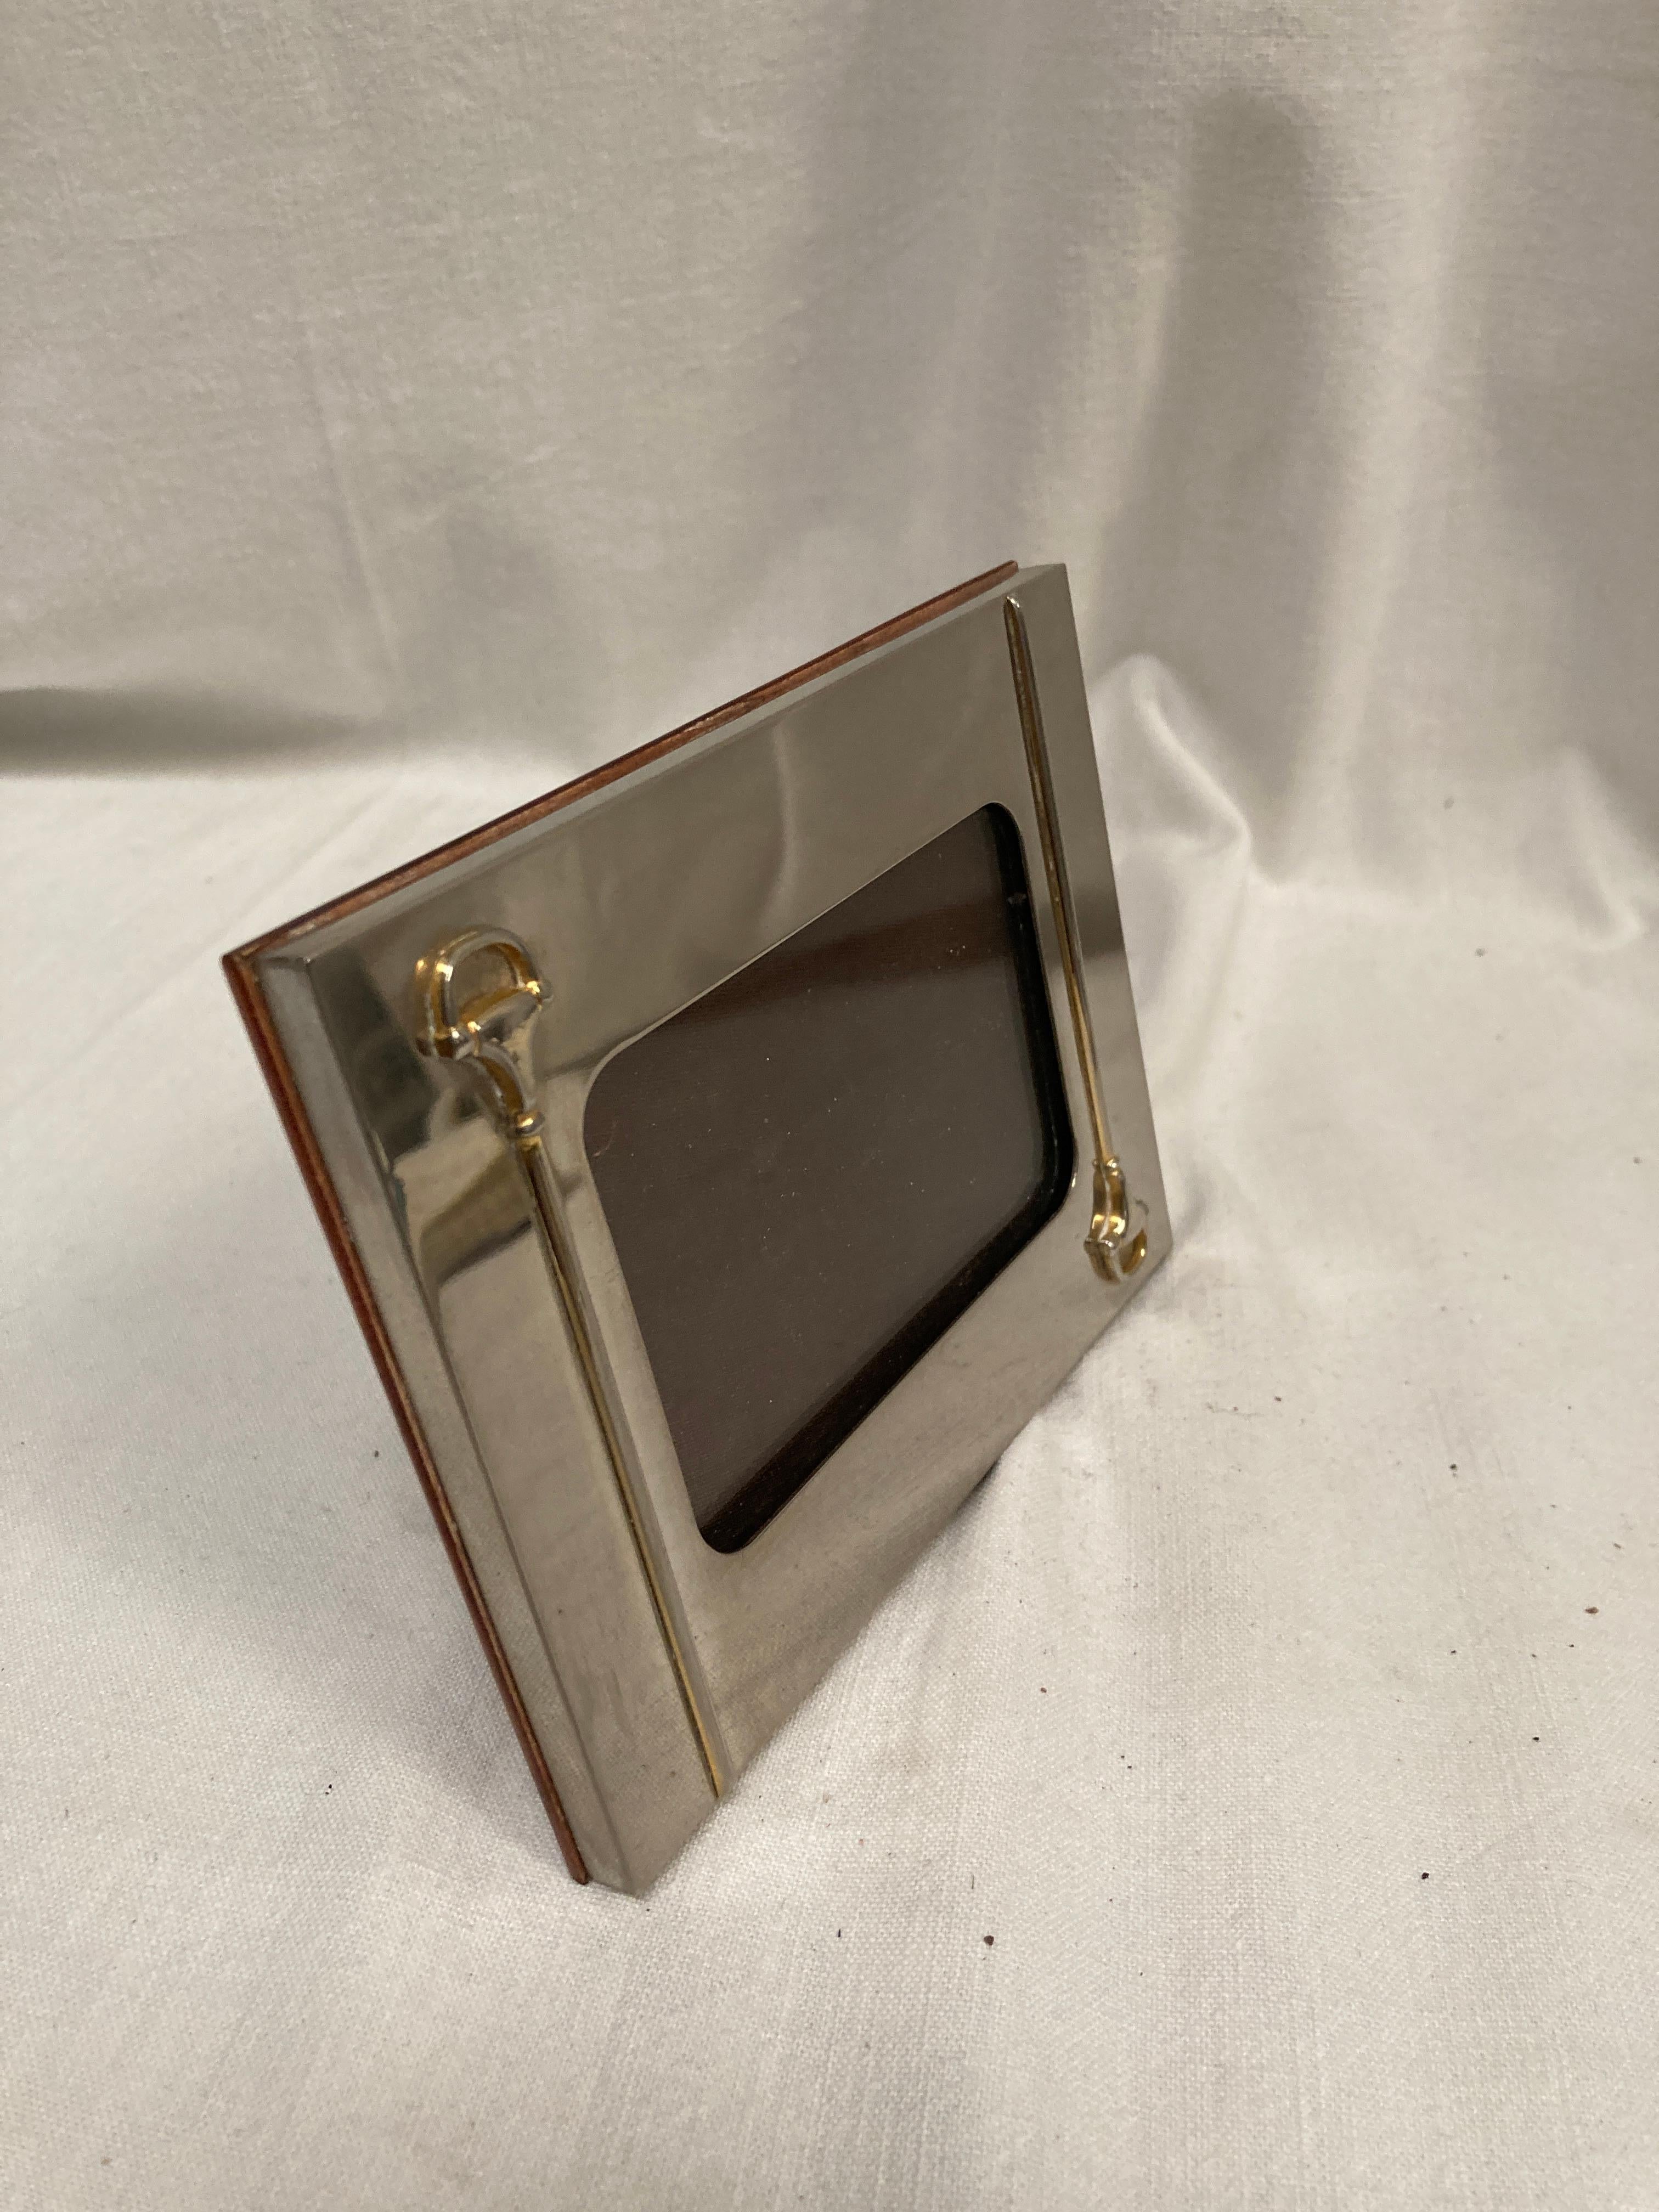 Italian 1970's Gucci picture frame For Sale